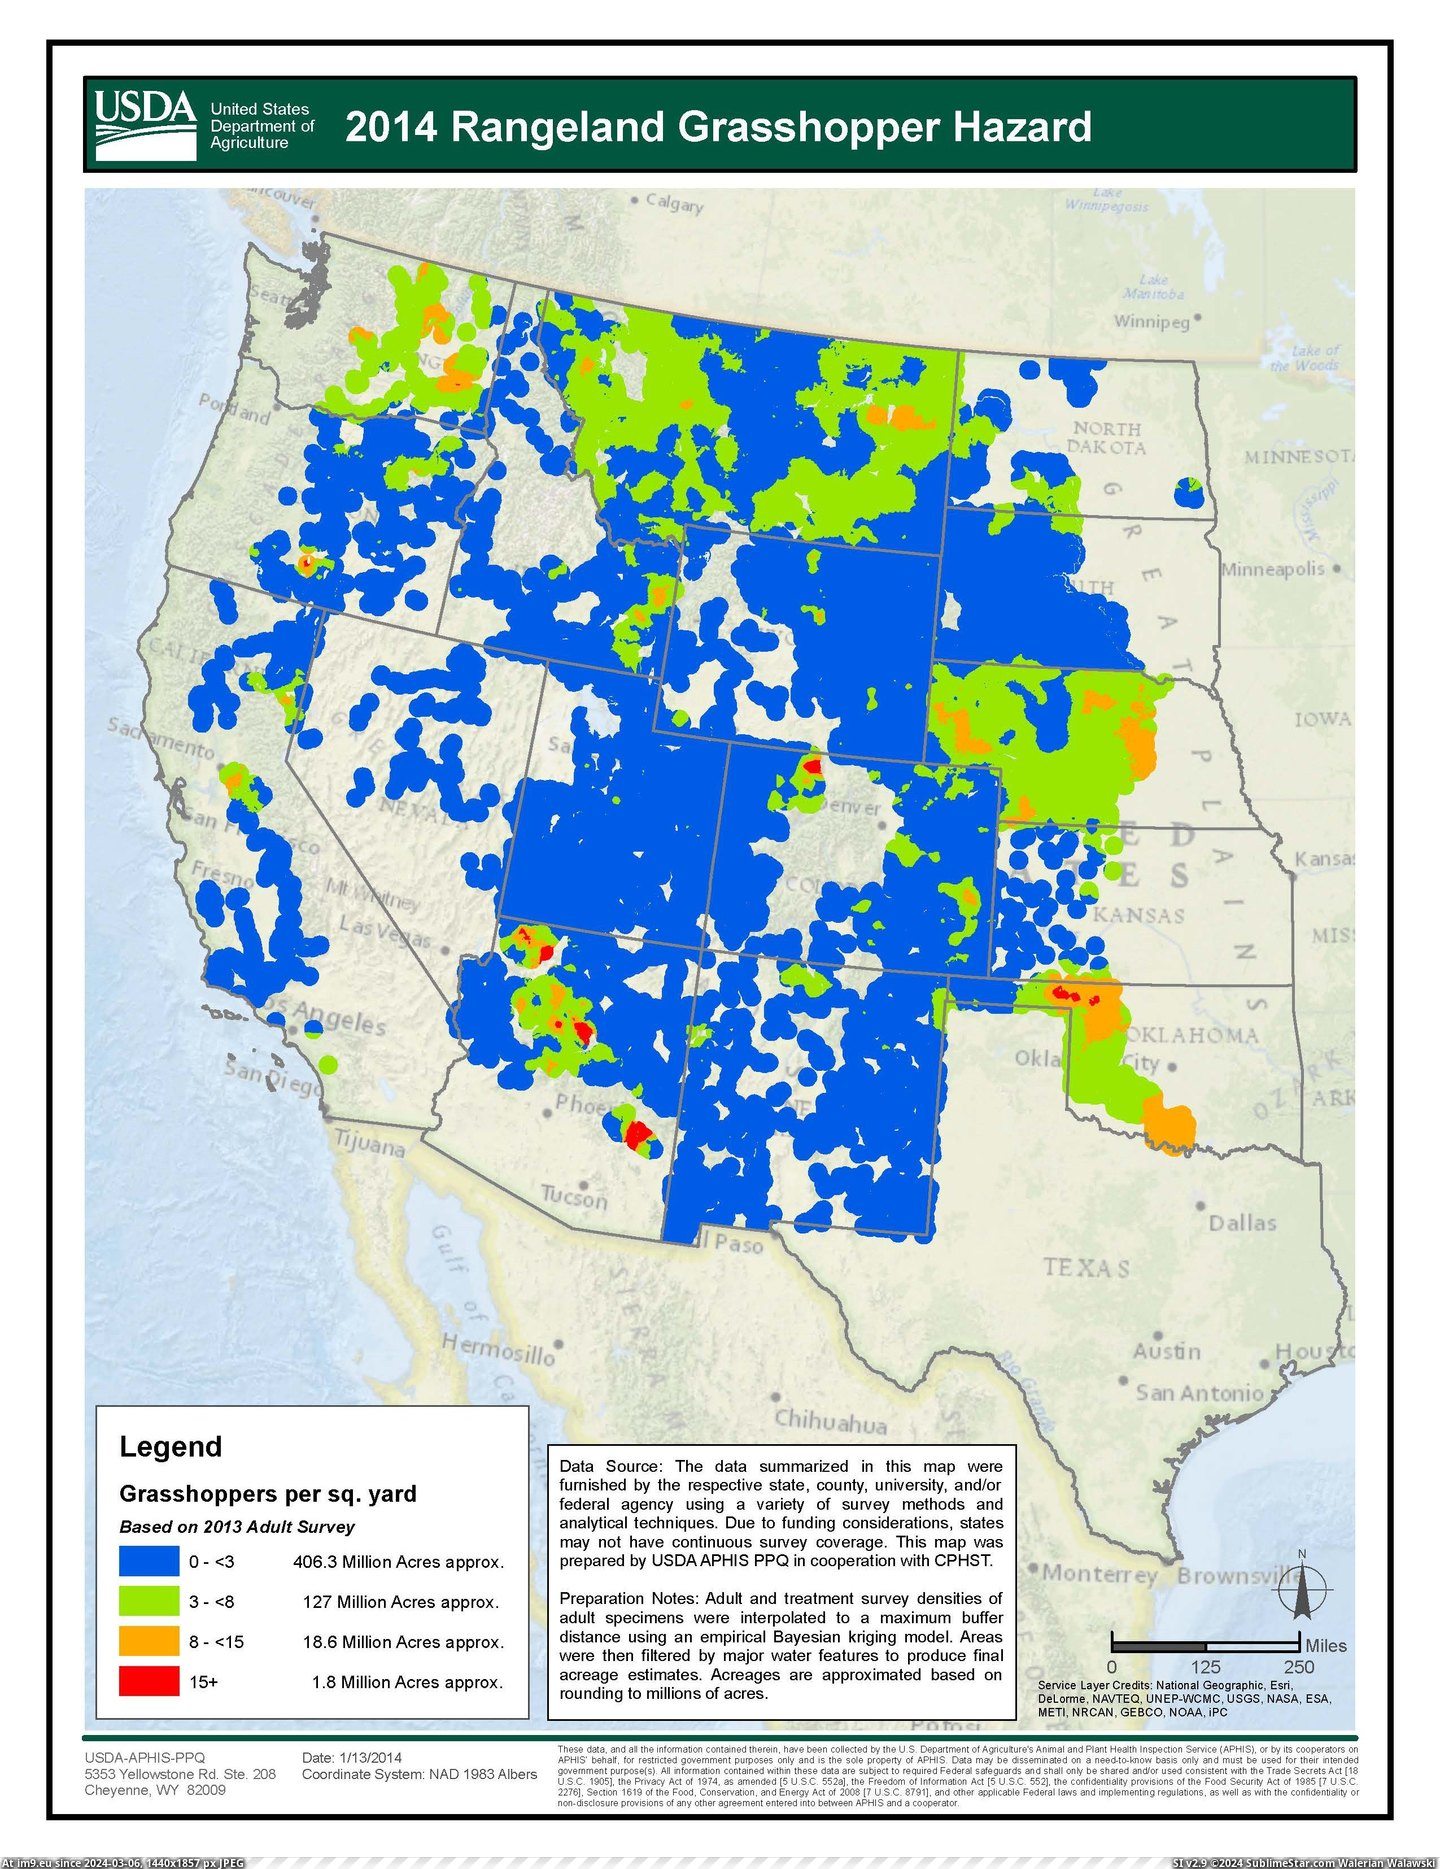 #Western #Activity #2550x3300 #Hotbeds #Grasshopper #Hazards [Mapporn] The Hotbeds and Hazards of Grasshopper Activity in the Western US. [2550x3300] Pic. (Image of album My r/MAPS favs))